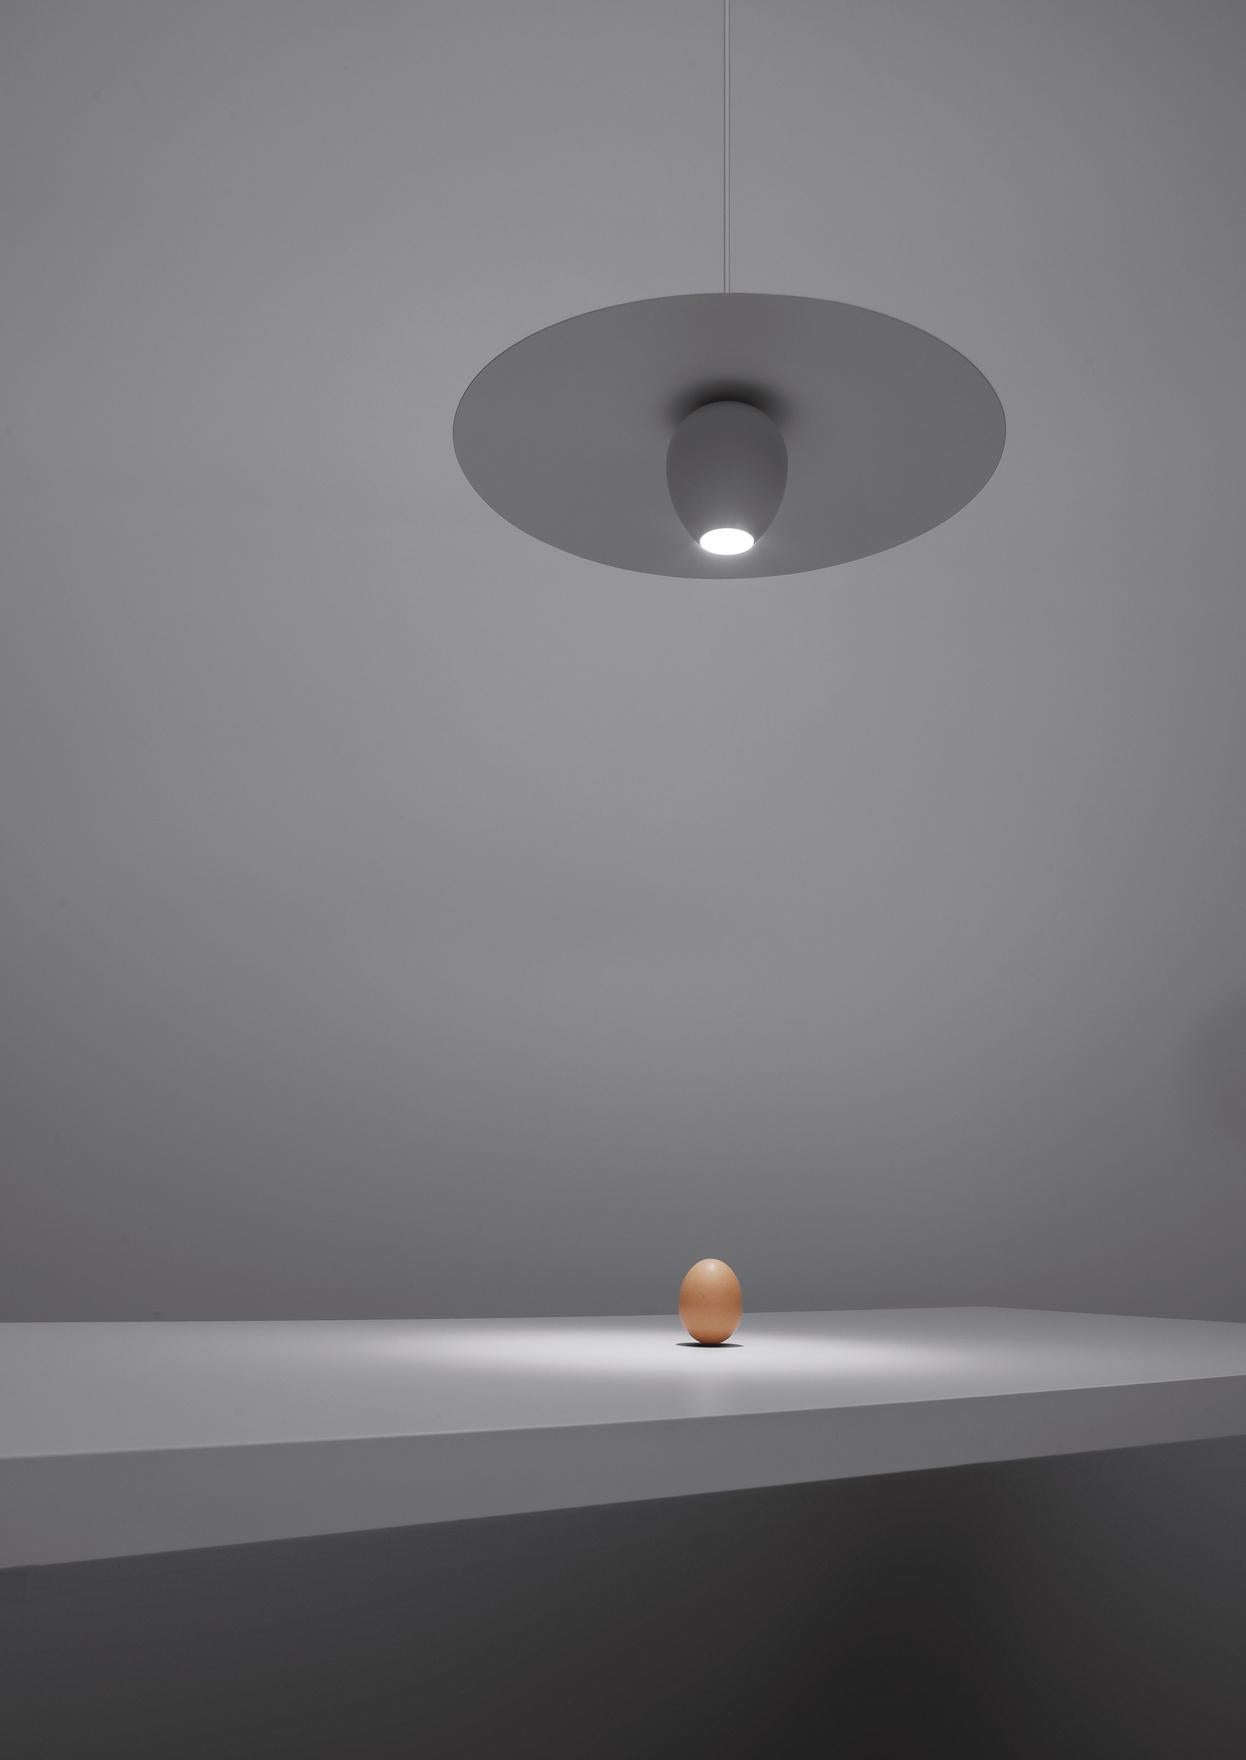 Use lighting as an ingredient in your meals by creating ambiance with the Ovonelpiatto Pendant. The shape of the pendant was inspired by an egg, one of the fundamental ingredients of the kitchen, set upon a curved plate.

Max 20W - 12V - GU4
120V -